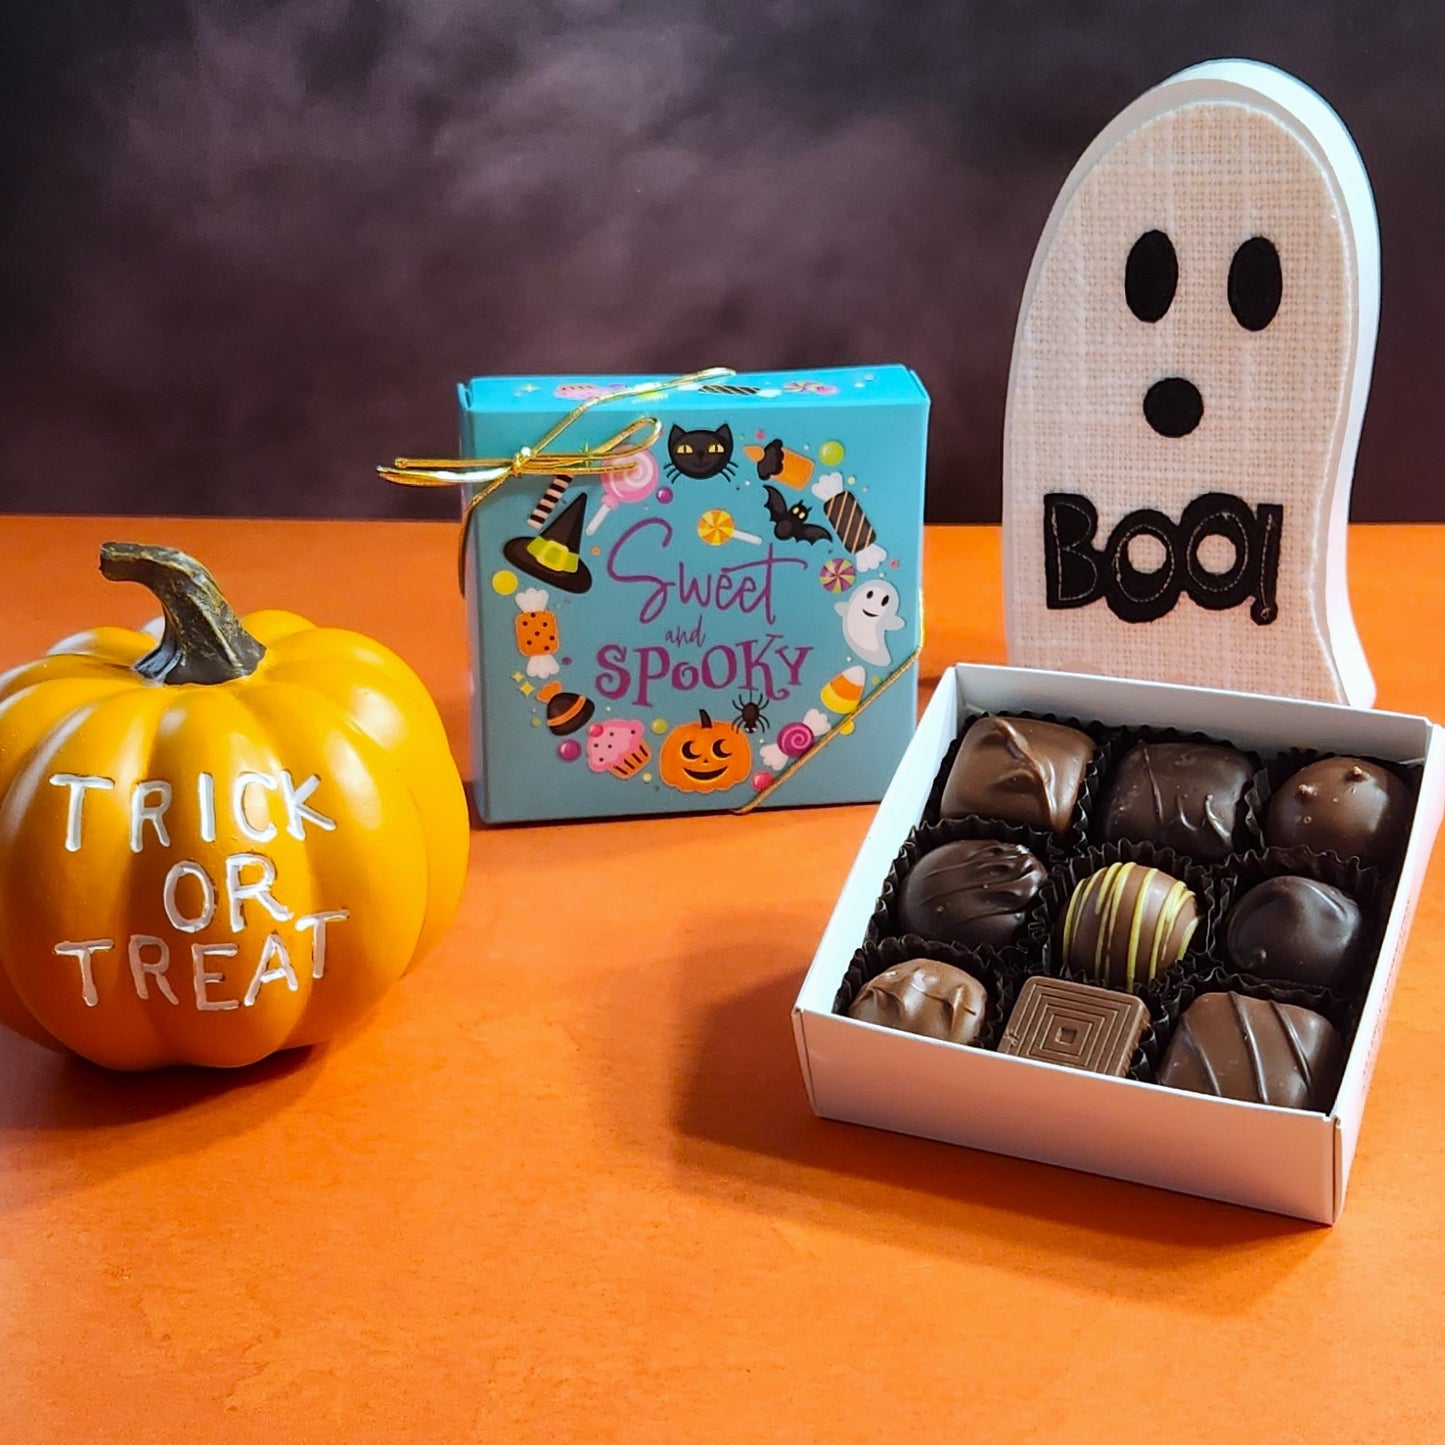 Treat your loved ones to a selection of our finest handcrafted chocolates, including creams, caramels, and meltaways. Personalize your gift with a decorative fall cover, making it a heartfelt way to show your care and appreciation.